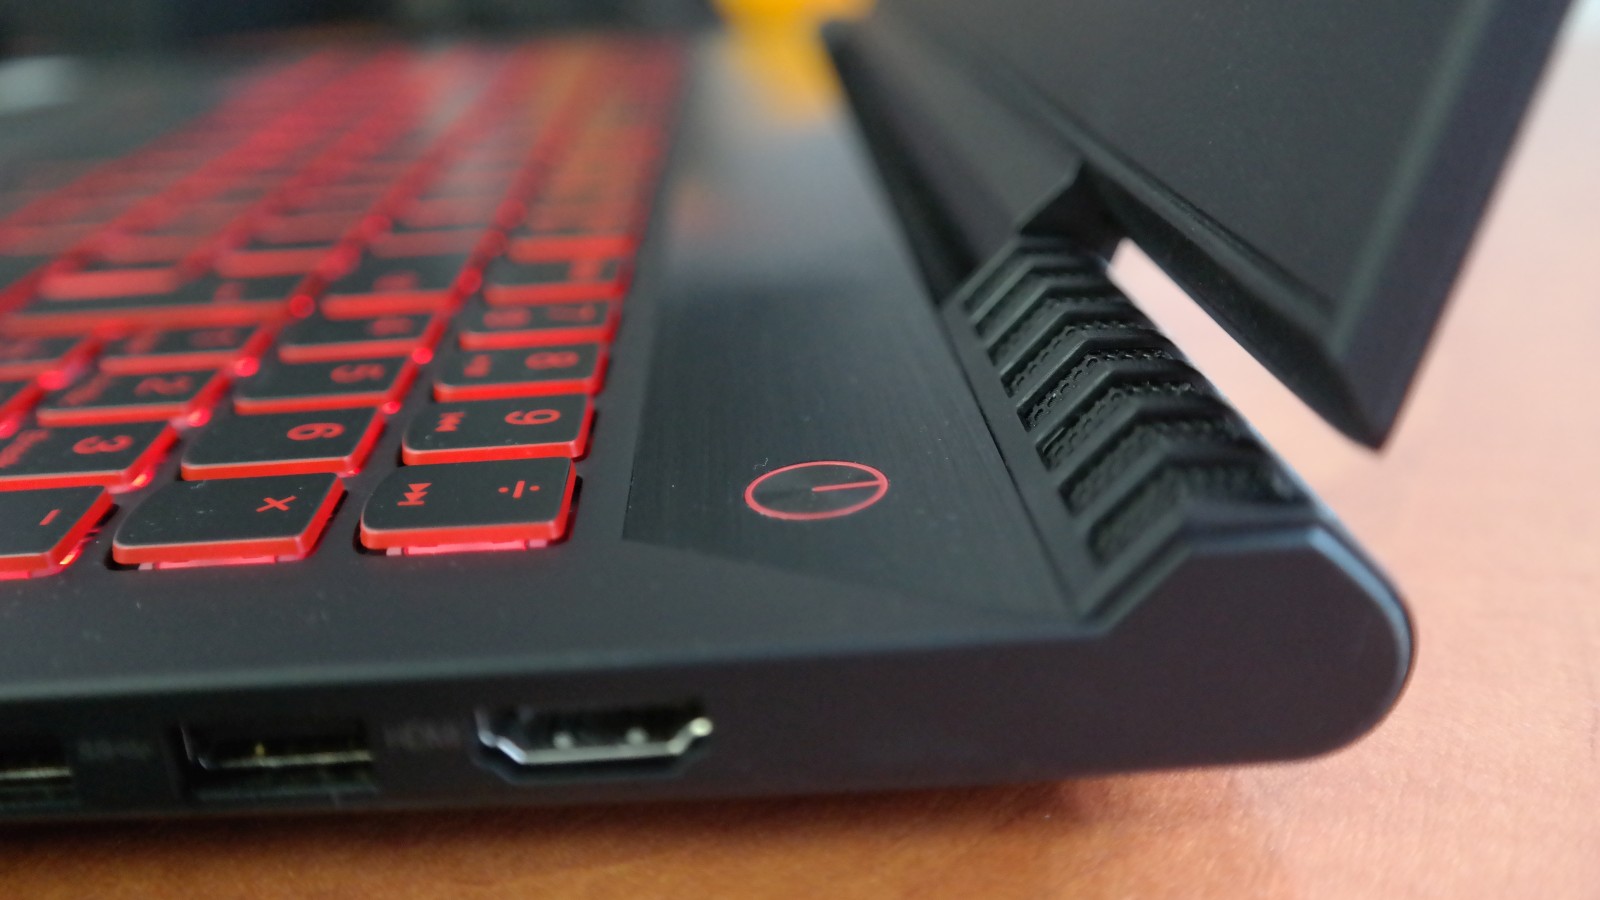 Lenovo Y520 review: excellent price for unbalanced - Gearburn